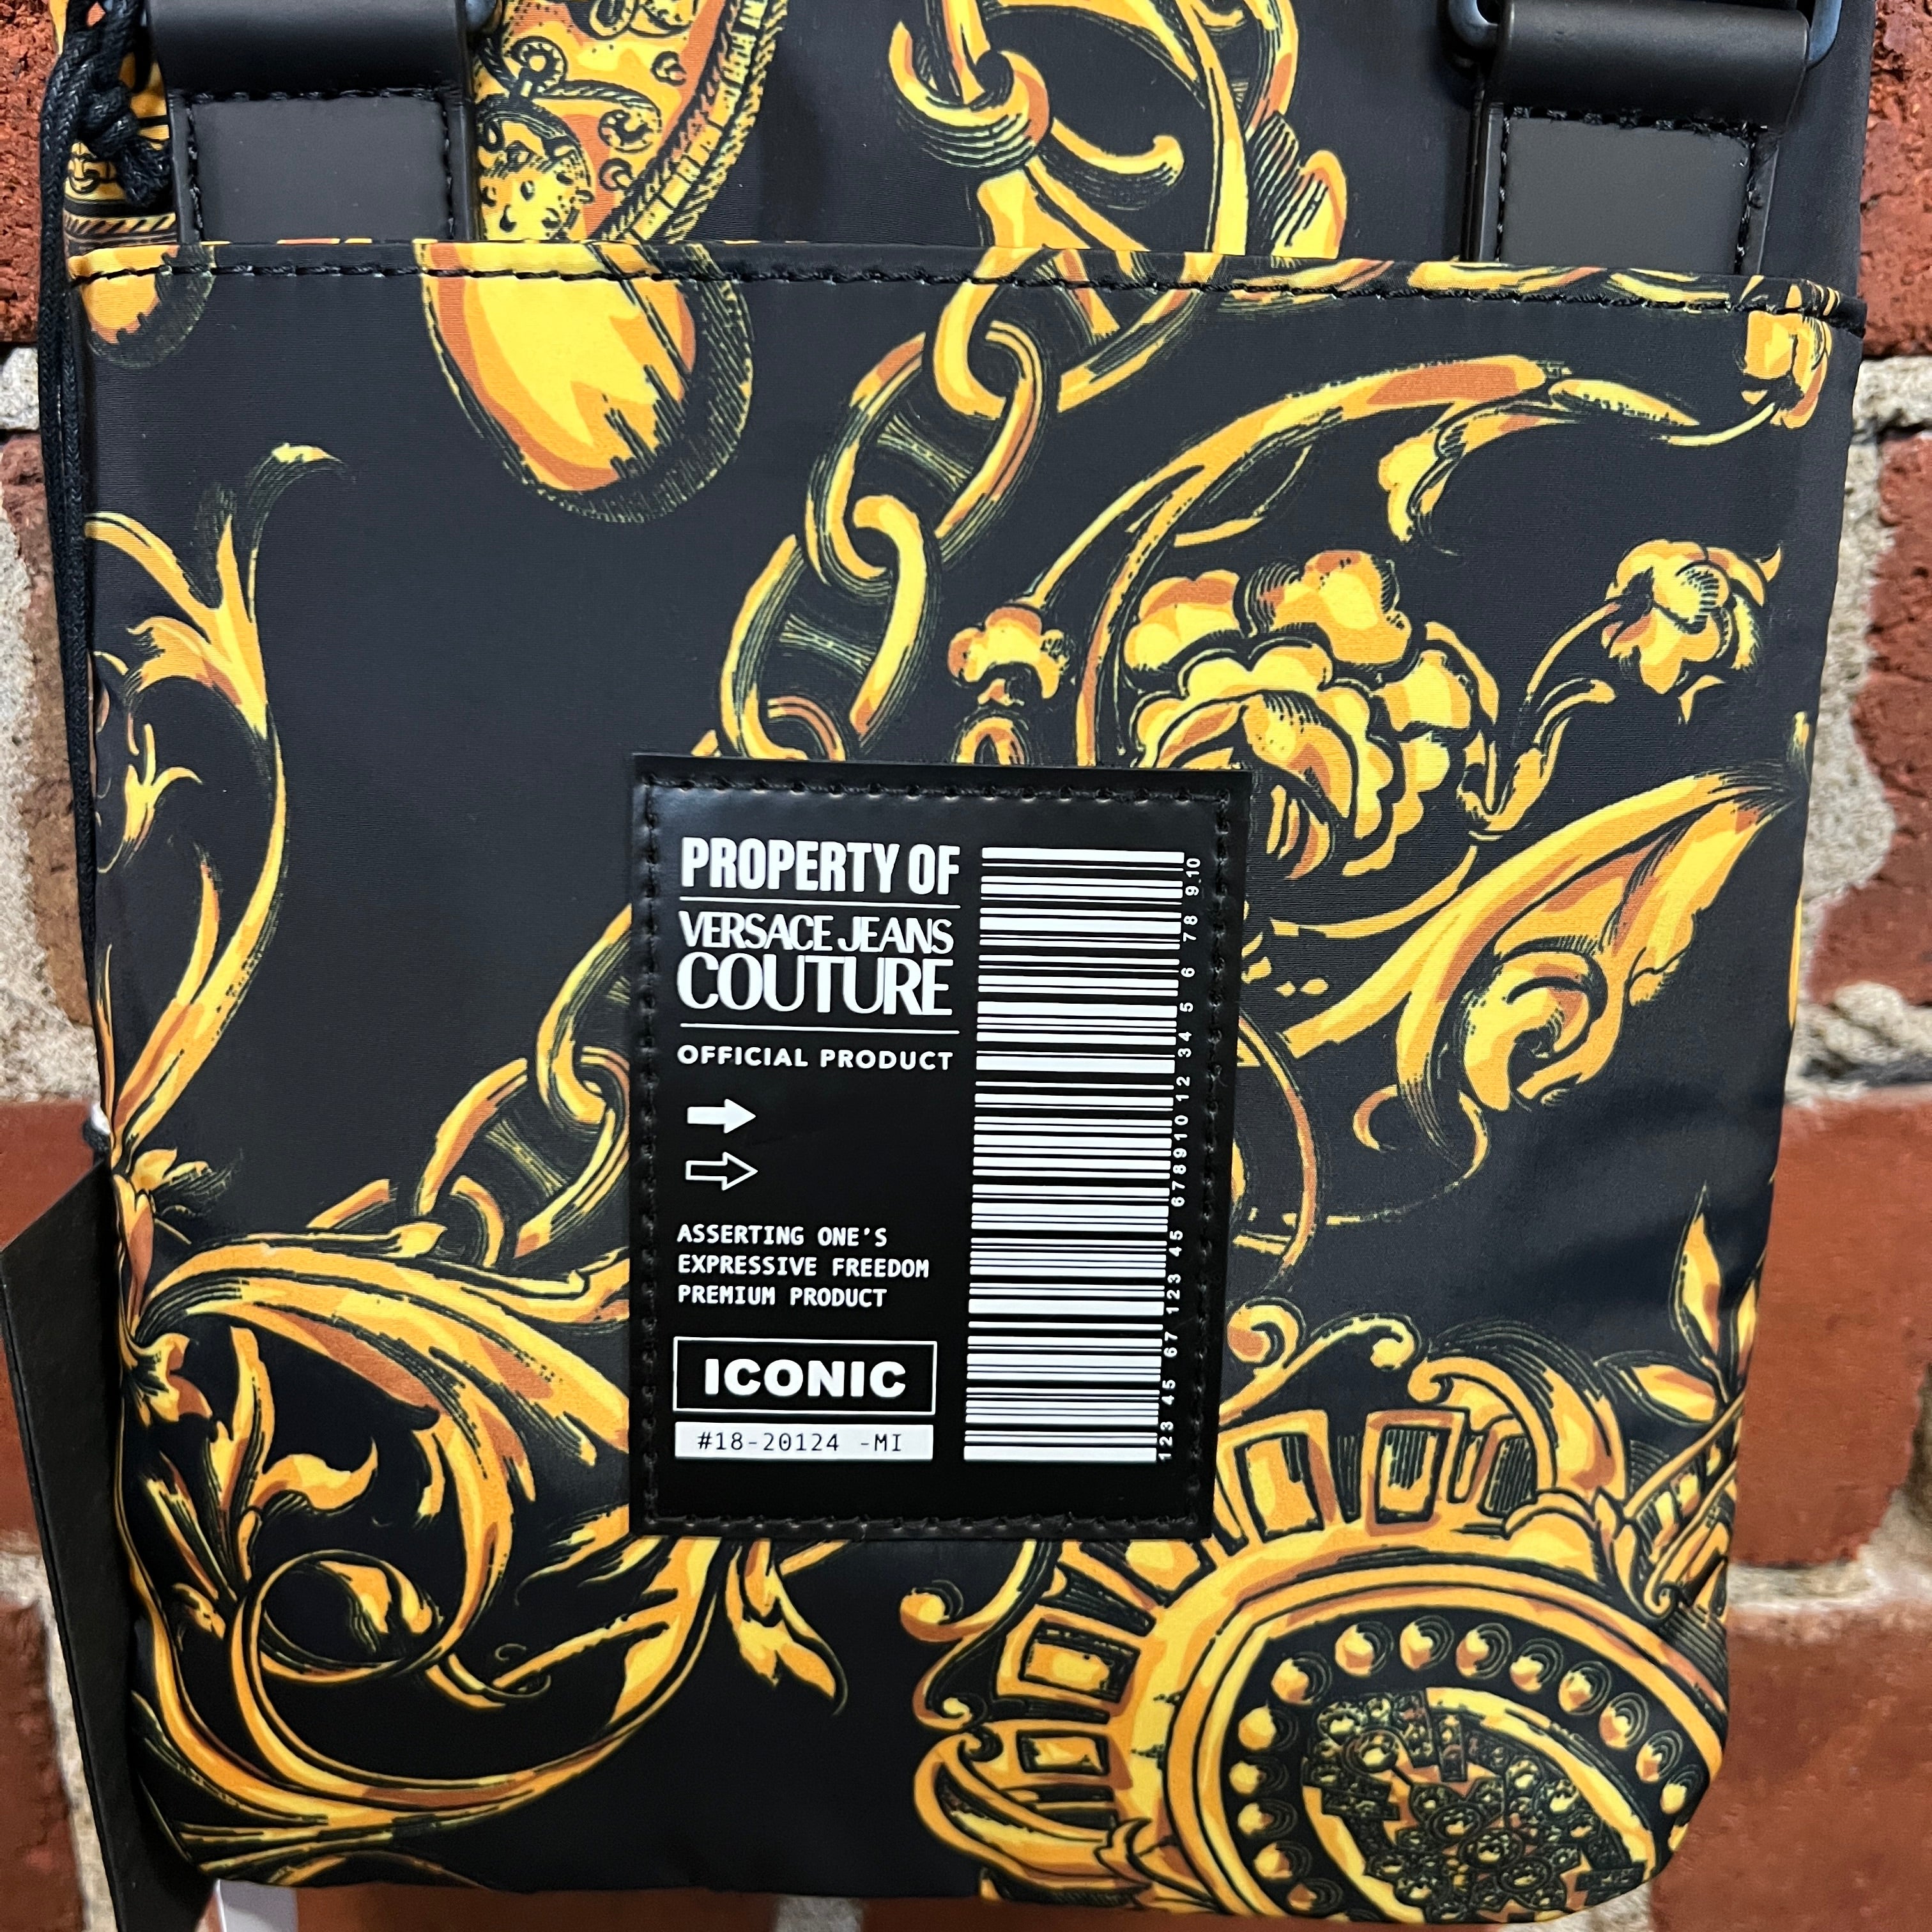 VERSACE JEANS COUTURE messenger bag (new with tags)